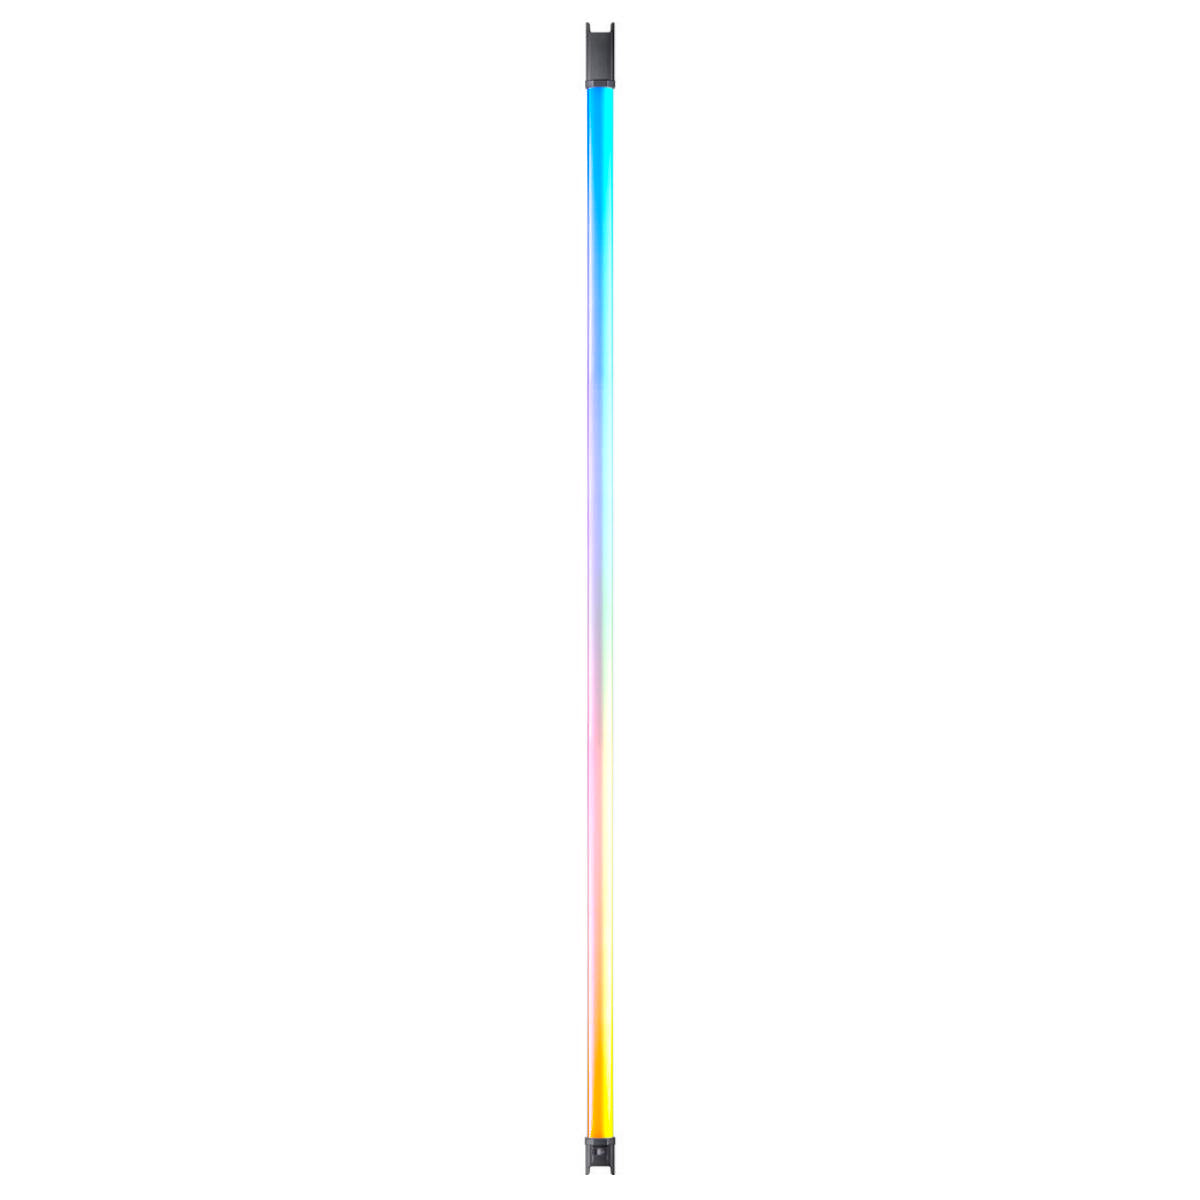 Godox TL180 55W 180cm RGB Bi-Color LED Tube Light Stick with 2700-6500K Color Temperature, Built-in Battery & Effects, Bluetooth / Remote Control